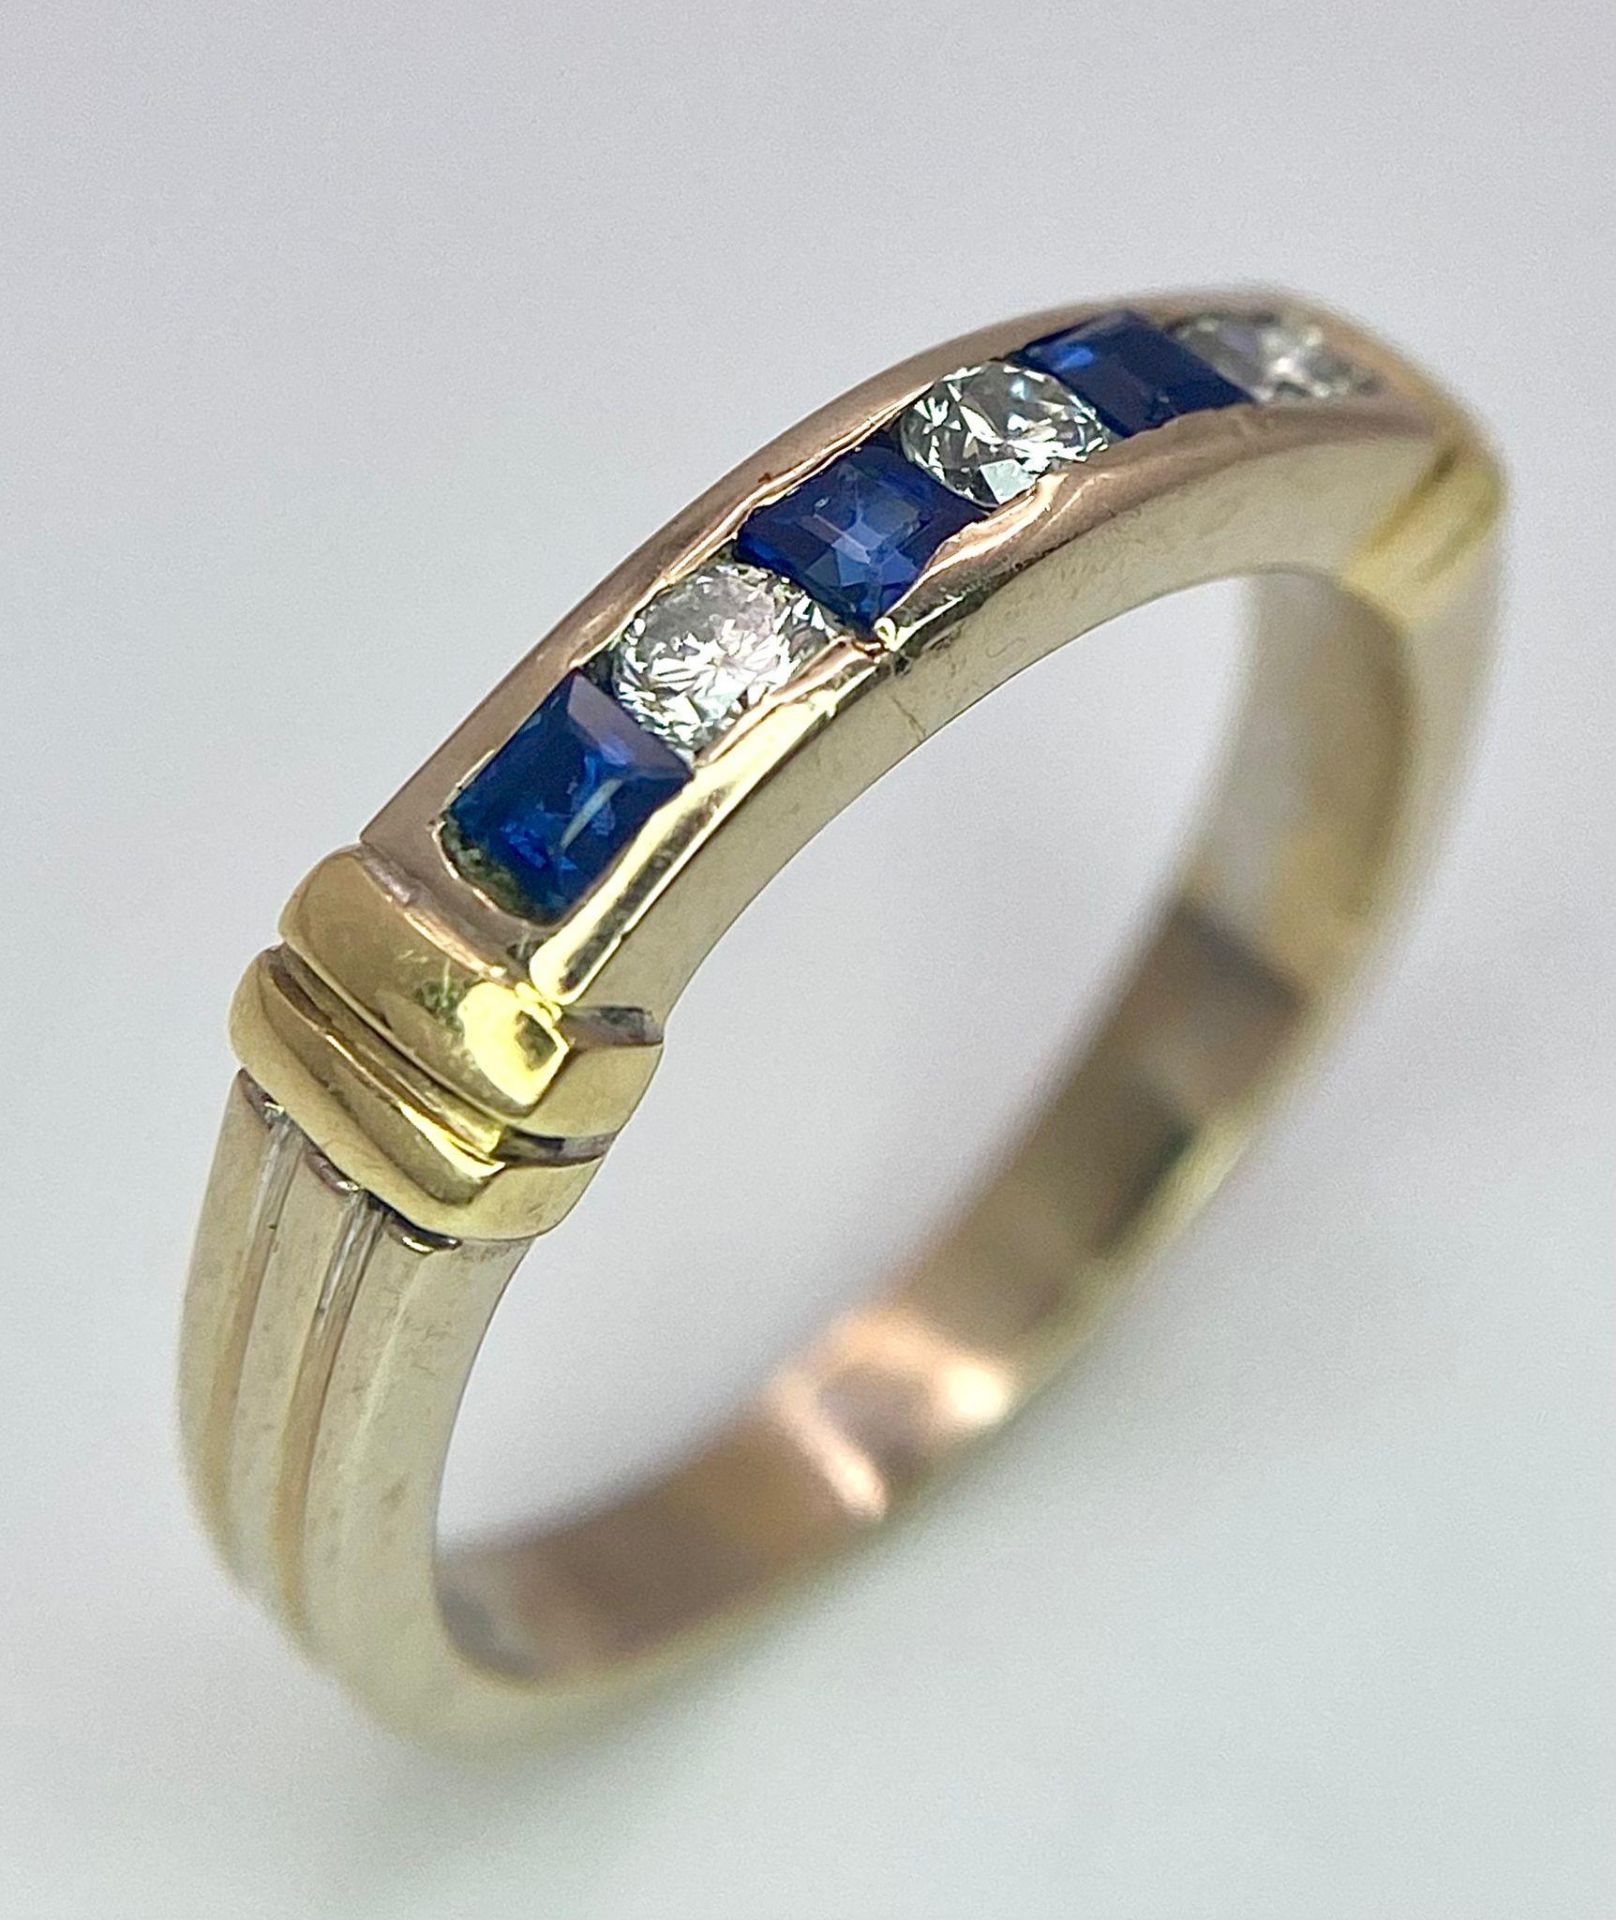 An 18 K yellow gold ring with alternating blue sapphires and diamonds. Size: K, weight: 3.2 g. - Image 5 of 13